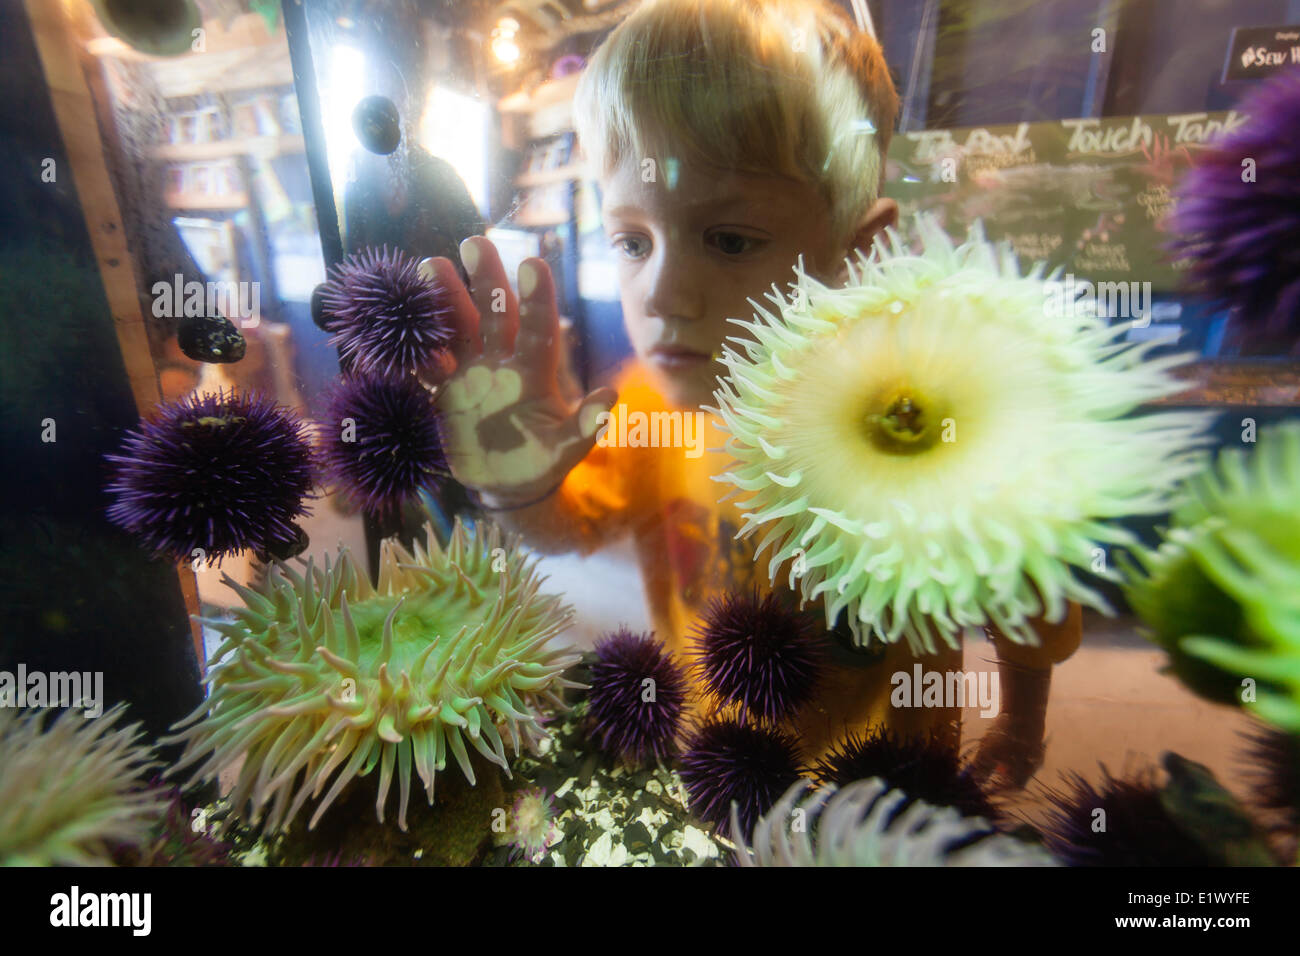 A young child peers into a tank inter-tidal sealife including sea anemone (Actiniaria) purple sea urchins (Echinoidea). at the Stock Photo